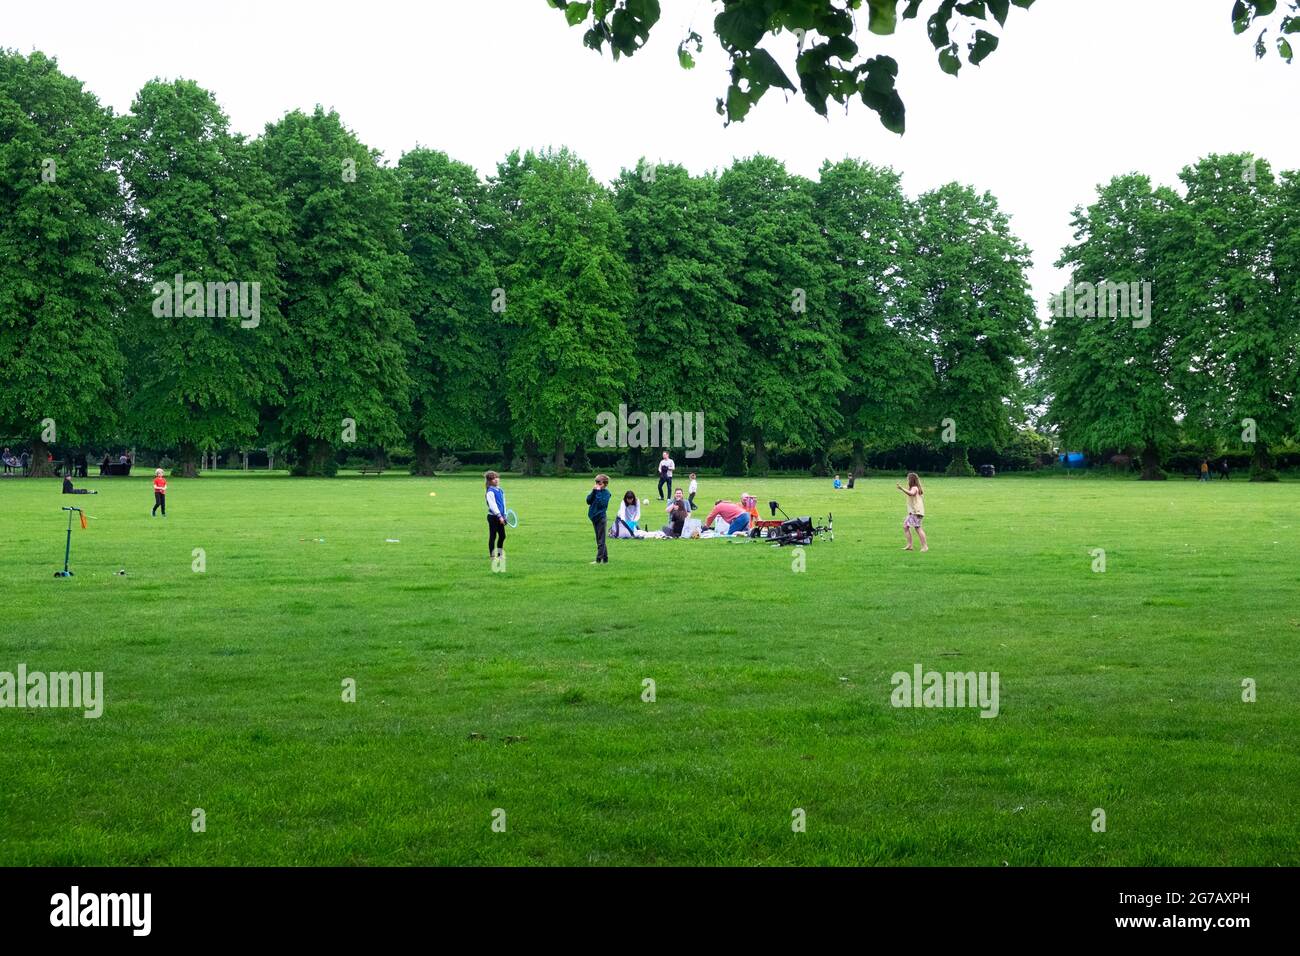 A family sitting on blanket in St James Park Walthamstow during the covid 19 pandemic in spring 2021 Walthamstow East London Englan UK KATHY DEWITT Stock Photo